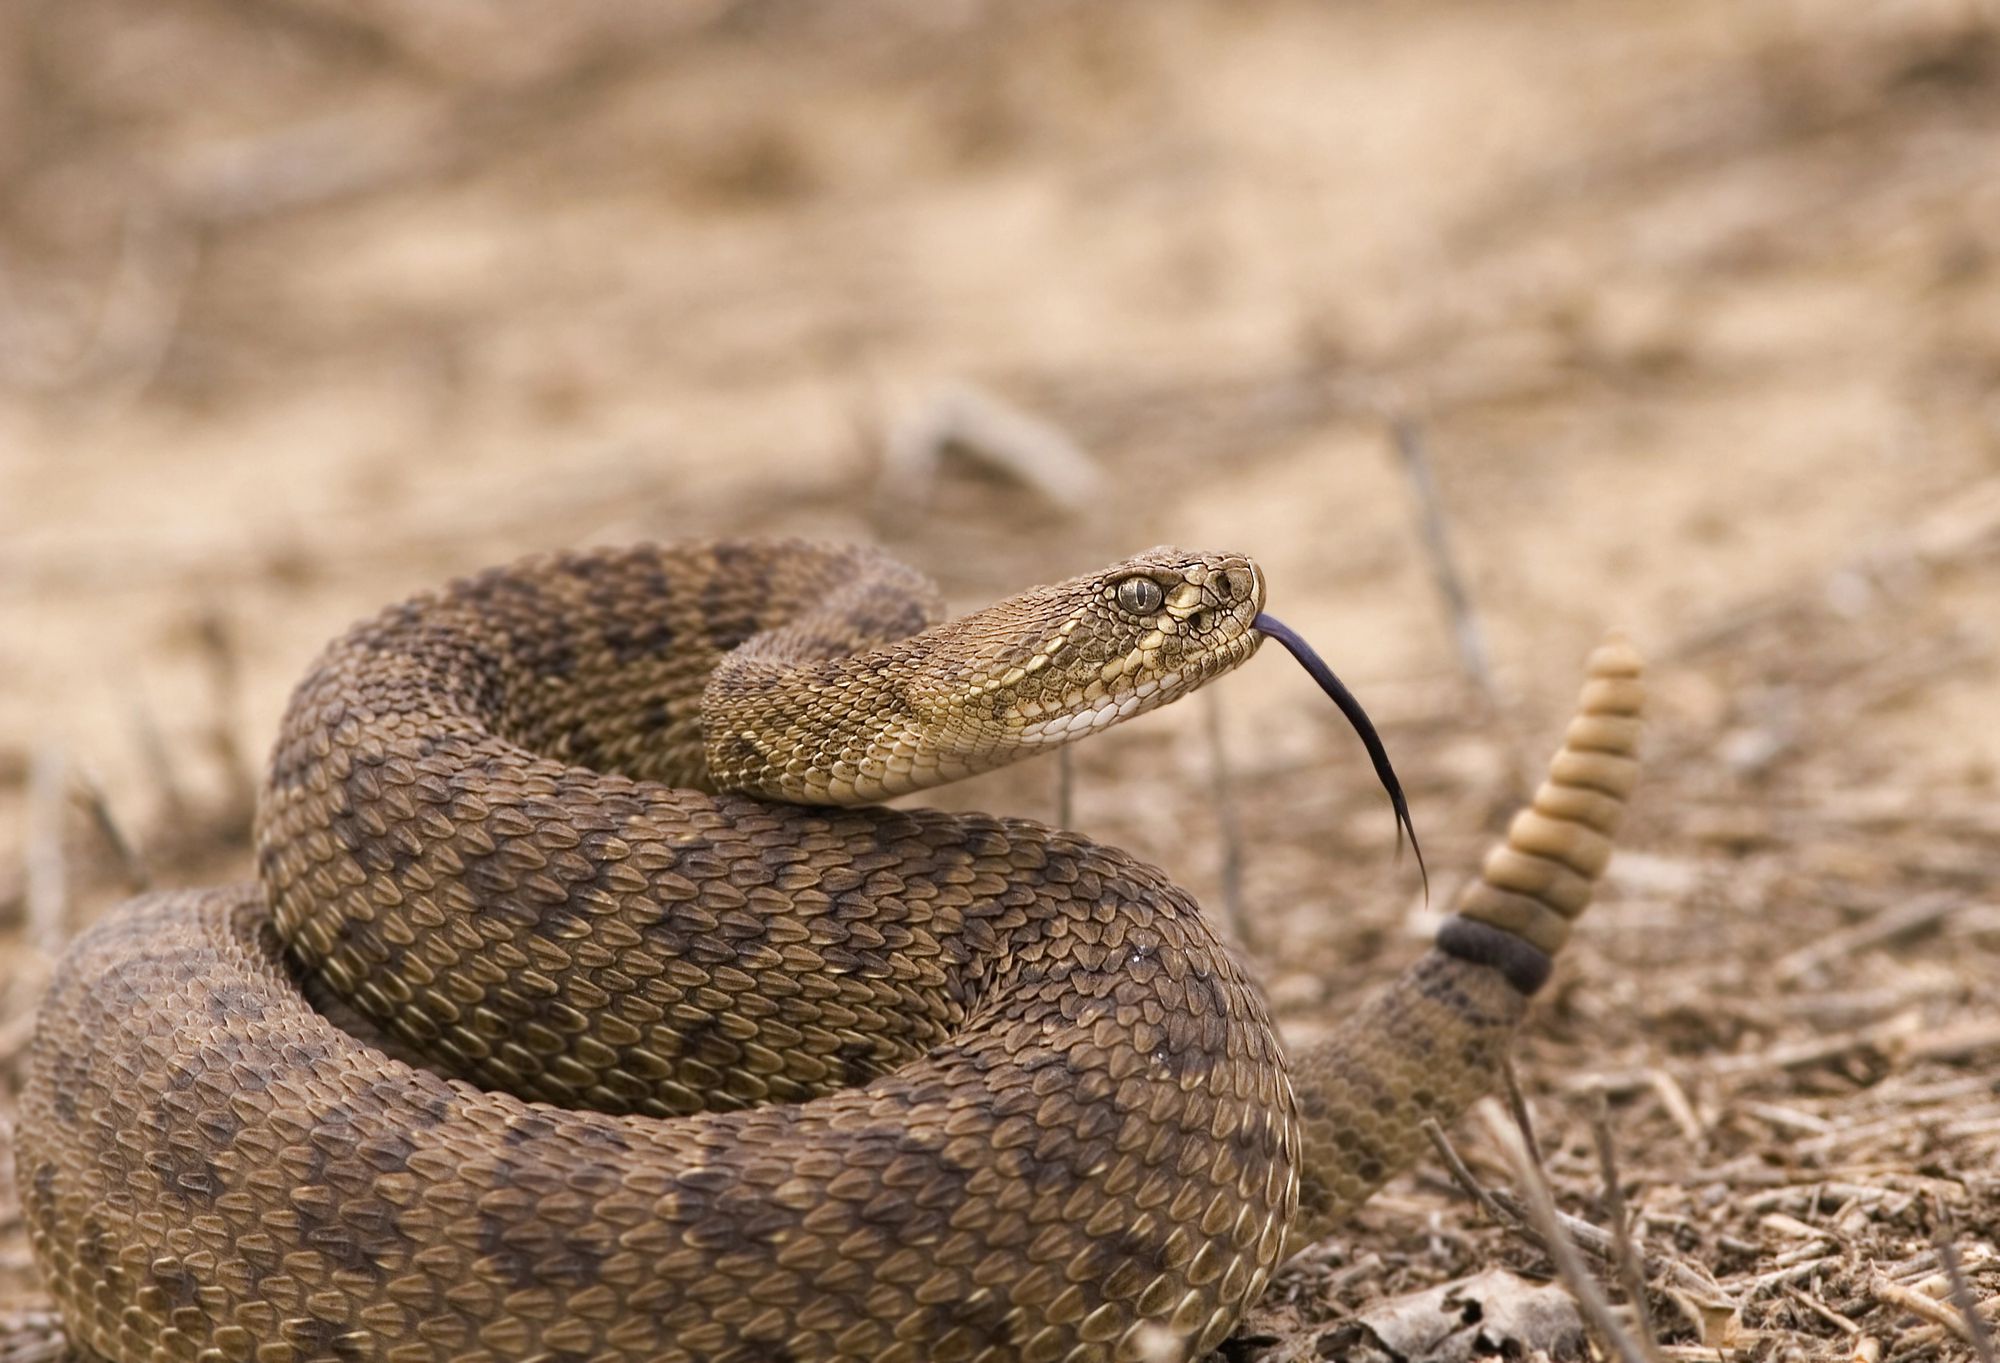 <p><b>Fatal attacks since the 1970s</b>: 57 </p><p>Each year, venomous snakes like rattlesnakes, copperheads, and cottonmouths are responsible for a considerable number of bites. Thankfully, not all of these bites are fatal, but their frequent encounters with humans definitely keep them high on the danger list. In the United States alone, there are approximately 127 species of snakes, of which about 30 are venomous. The deadliest among these is the <a href="https://nationalzoo.si.edu/animals/eastern-diamondback-rattlesnake">Eastern diamondback rattlesnake</a>.</p>